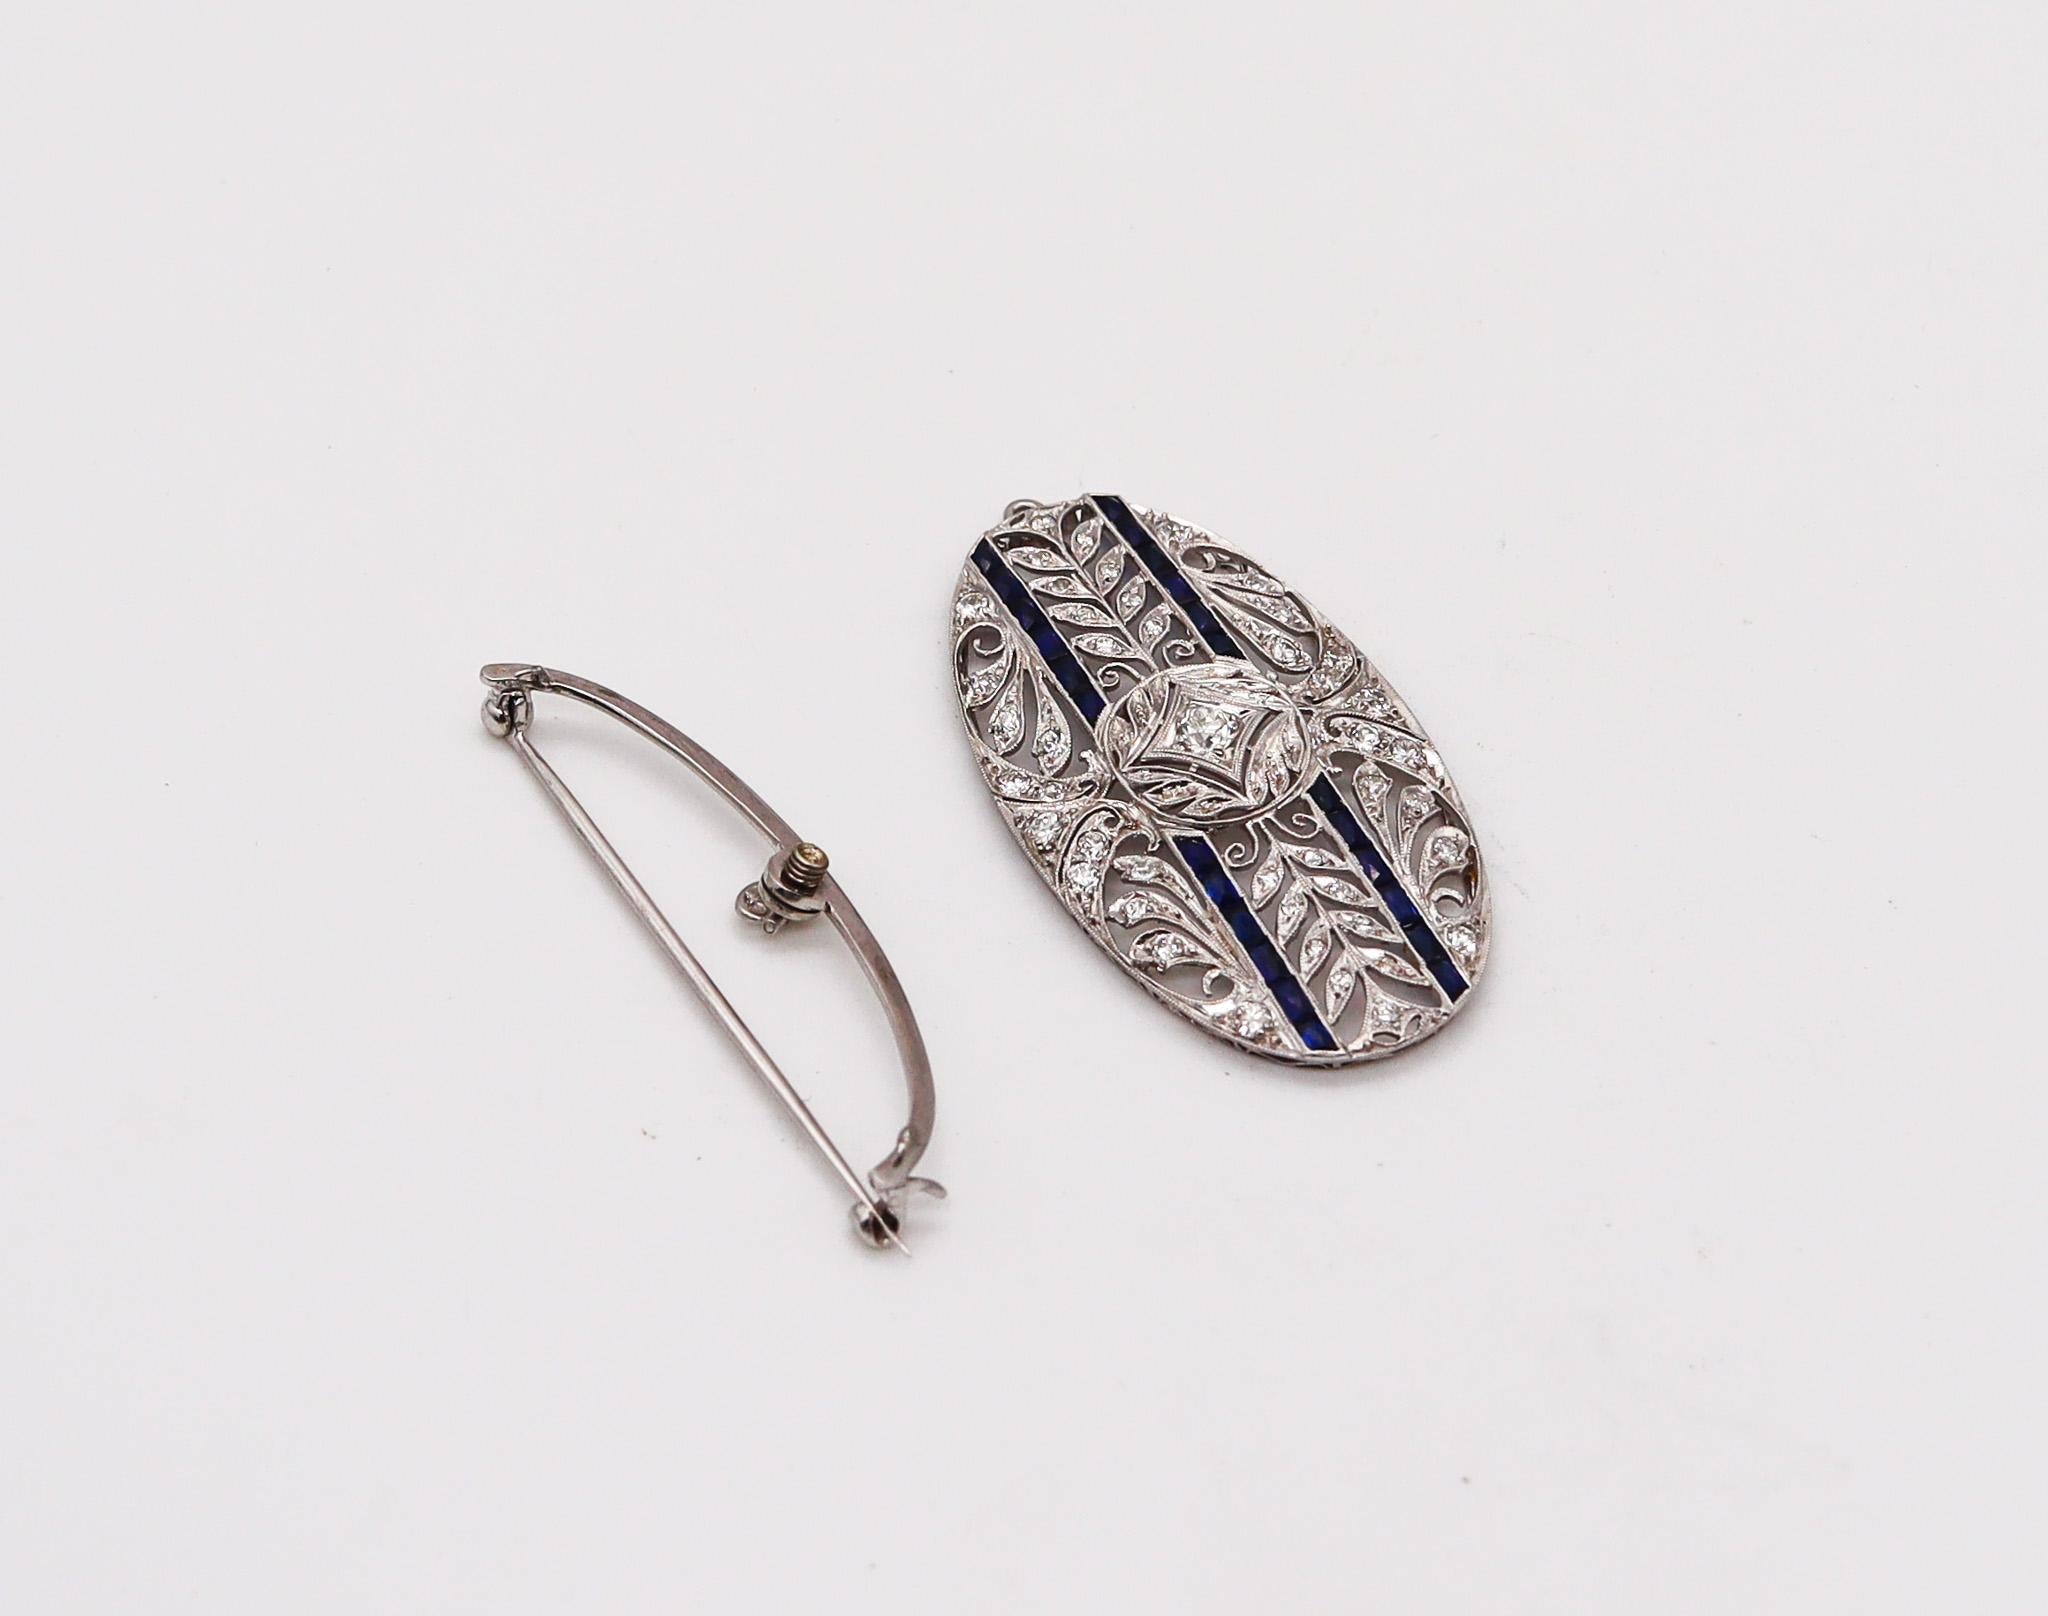 Edwardian 1910 Pendant Brooch in Platinum with 2.35 Ctw in Diamonds and Sapphire For Sale 2